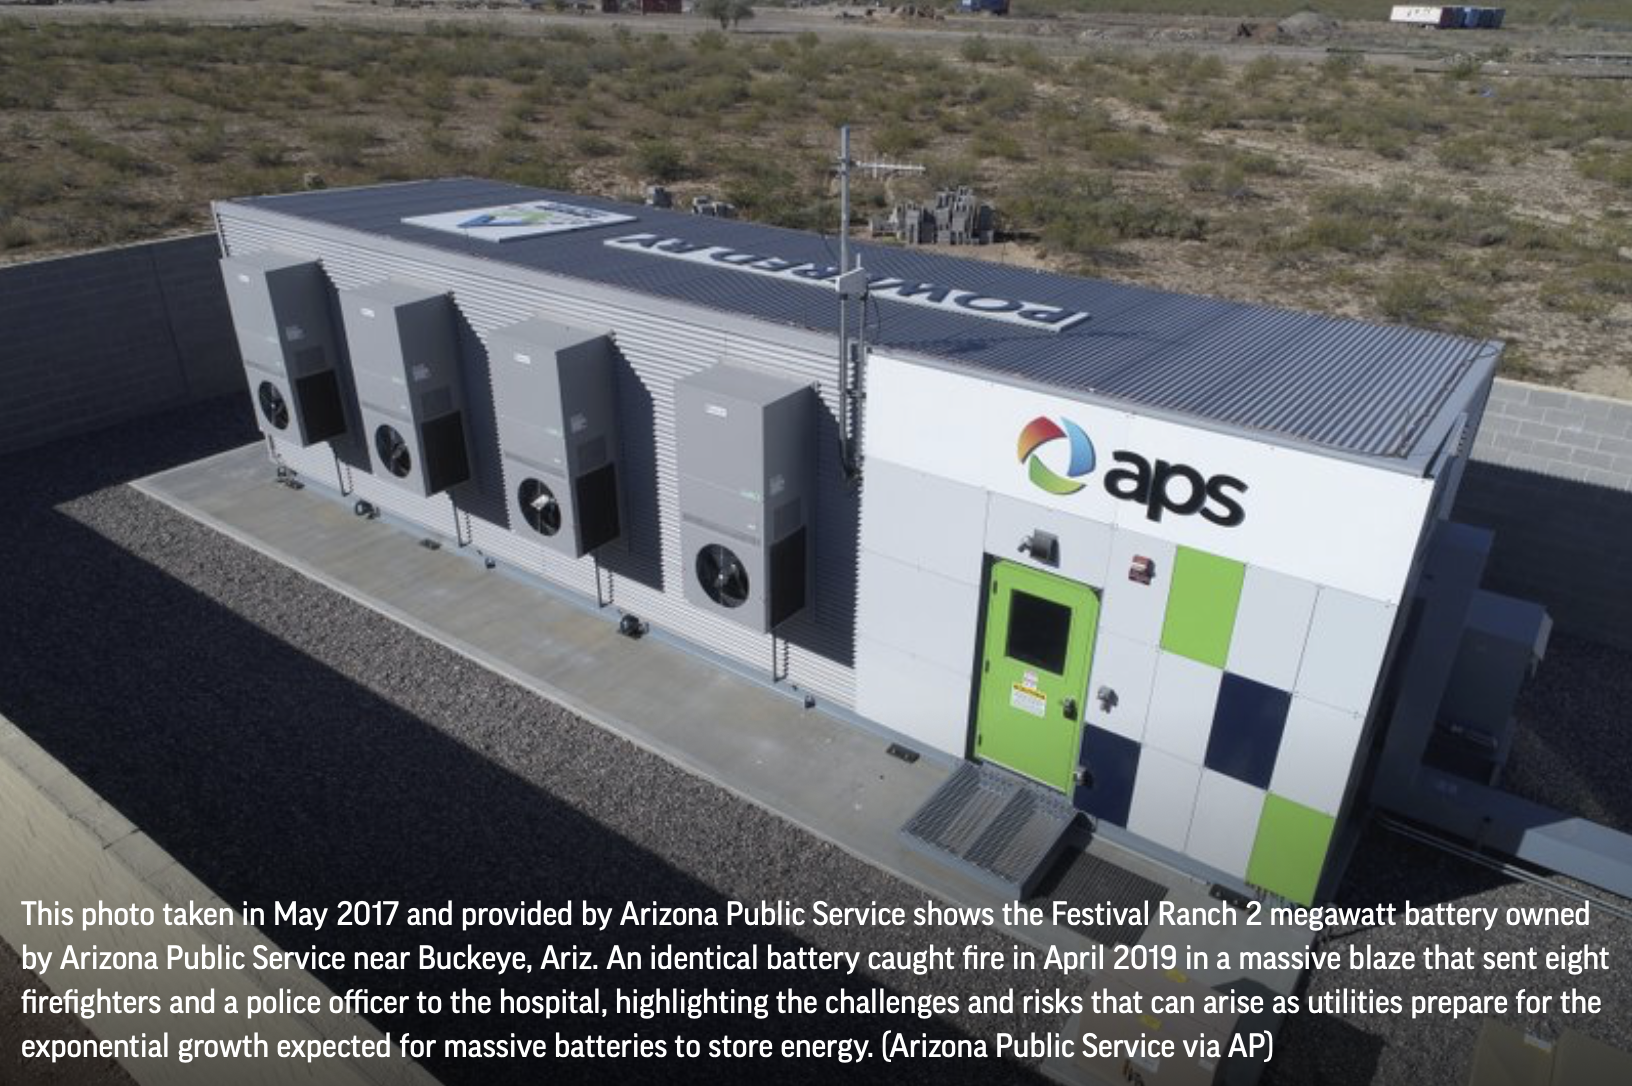 Arizona Public Service (APS) 2MW battery energy storage modules identical to the ones that caught fire.